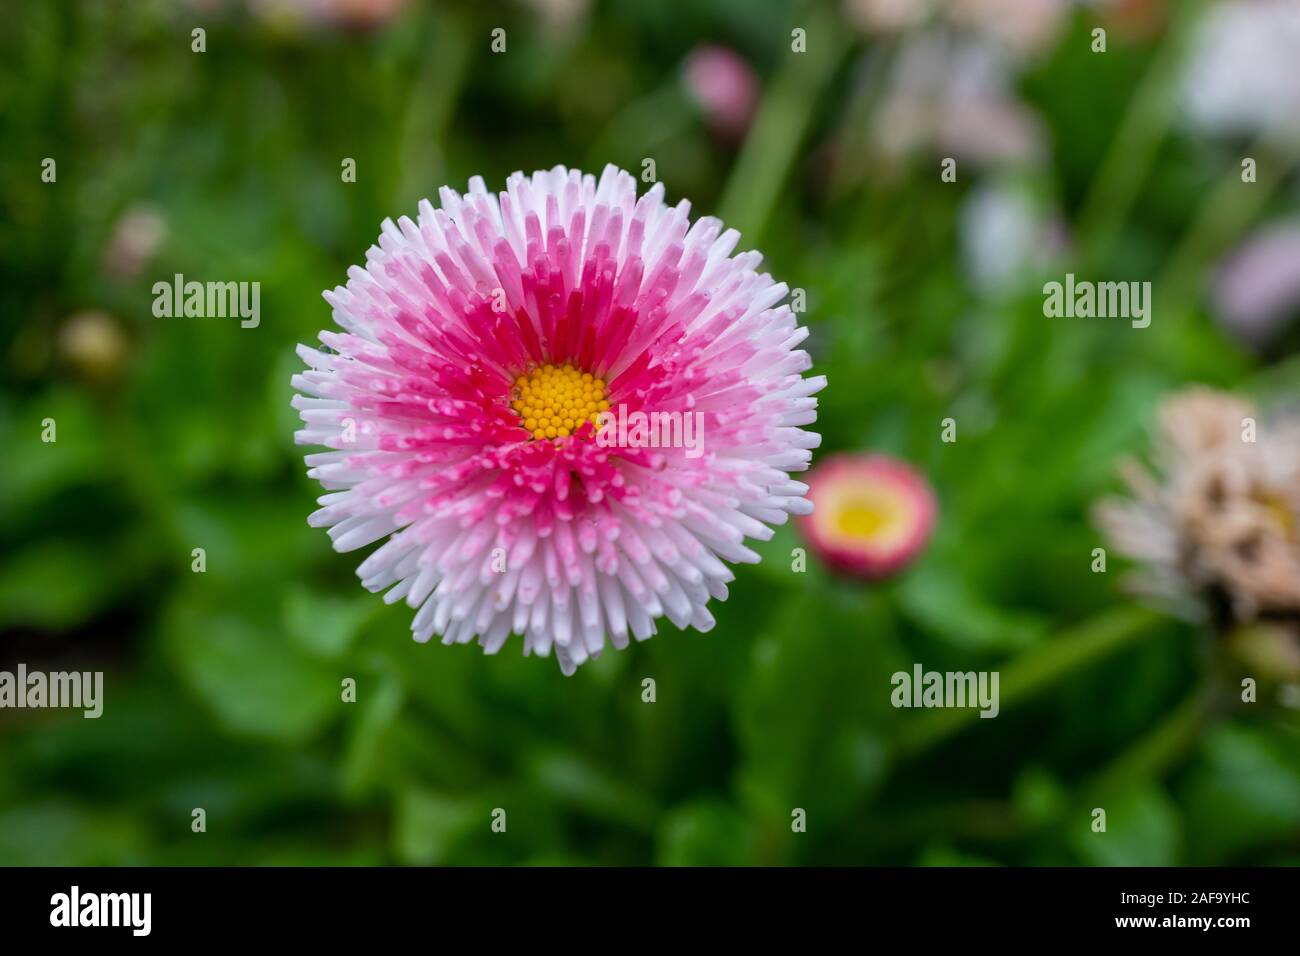 Beautiful pink flower with a green background in Germany during spring time - Daisy Pink Bellis Perennis Super Enorma Stock Photo